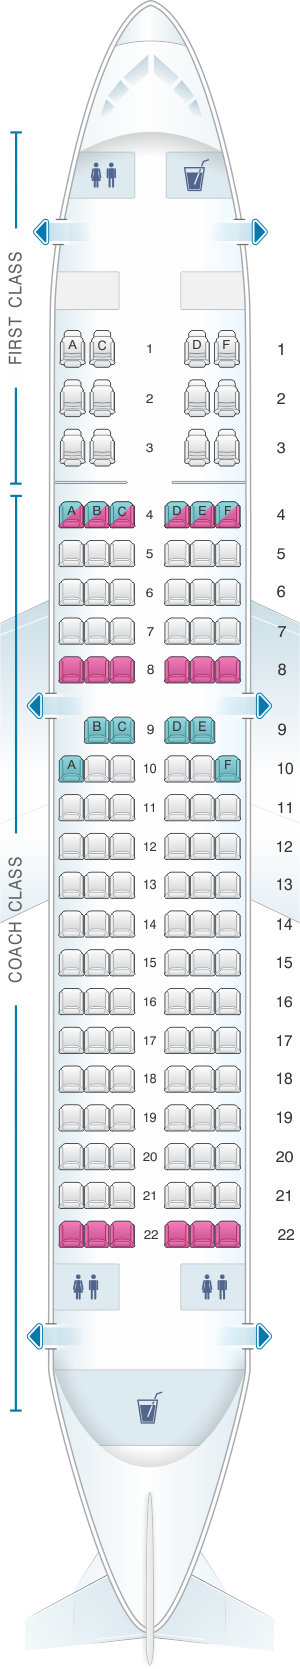 Seat map for US Airways Airbus A319